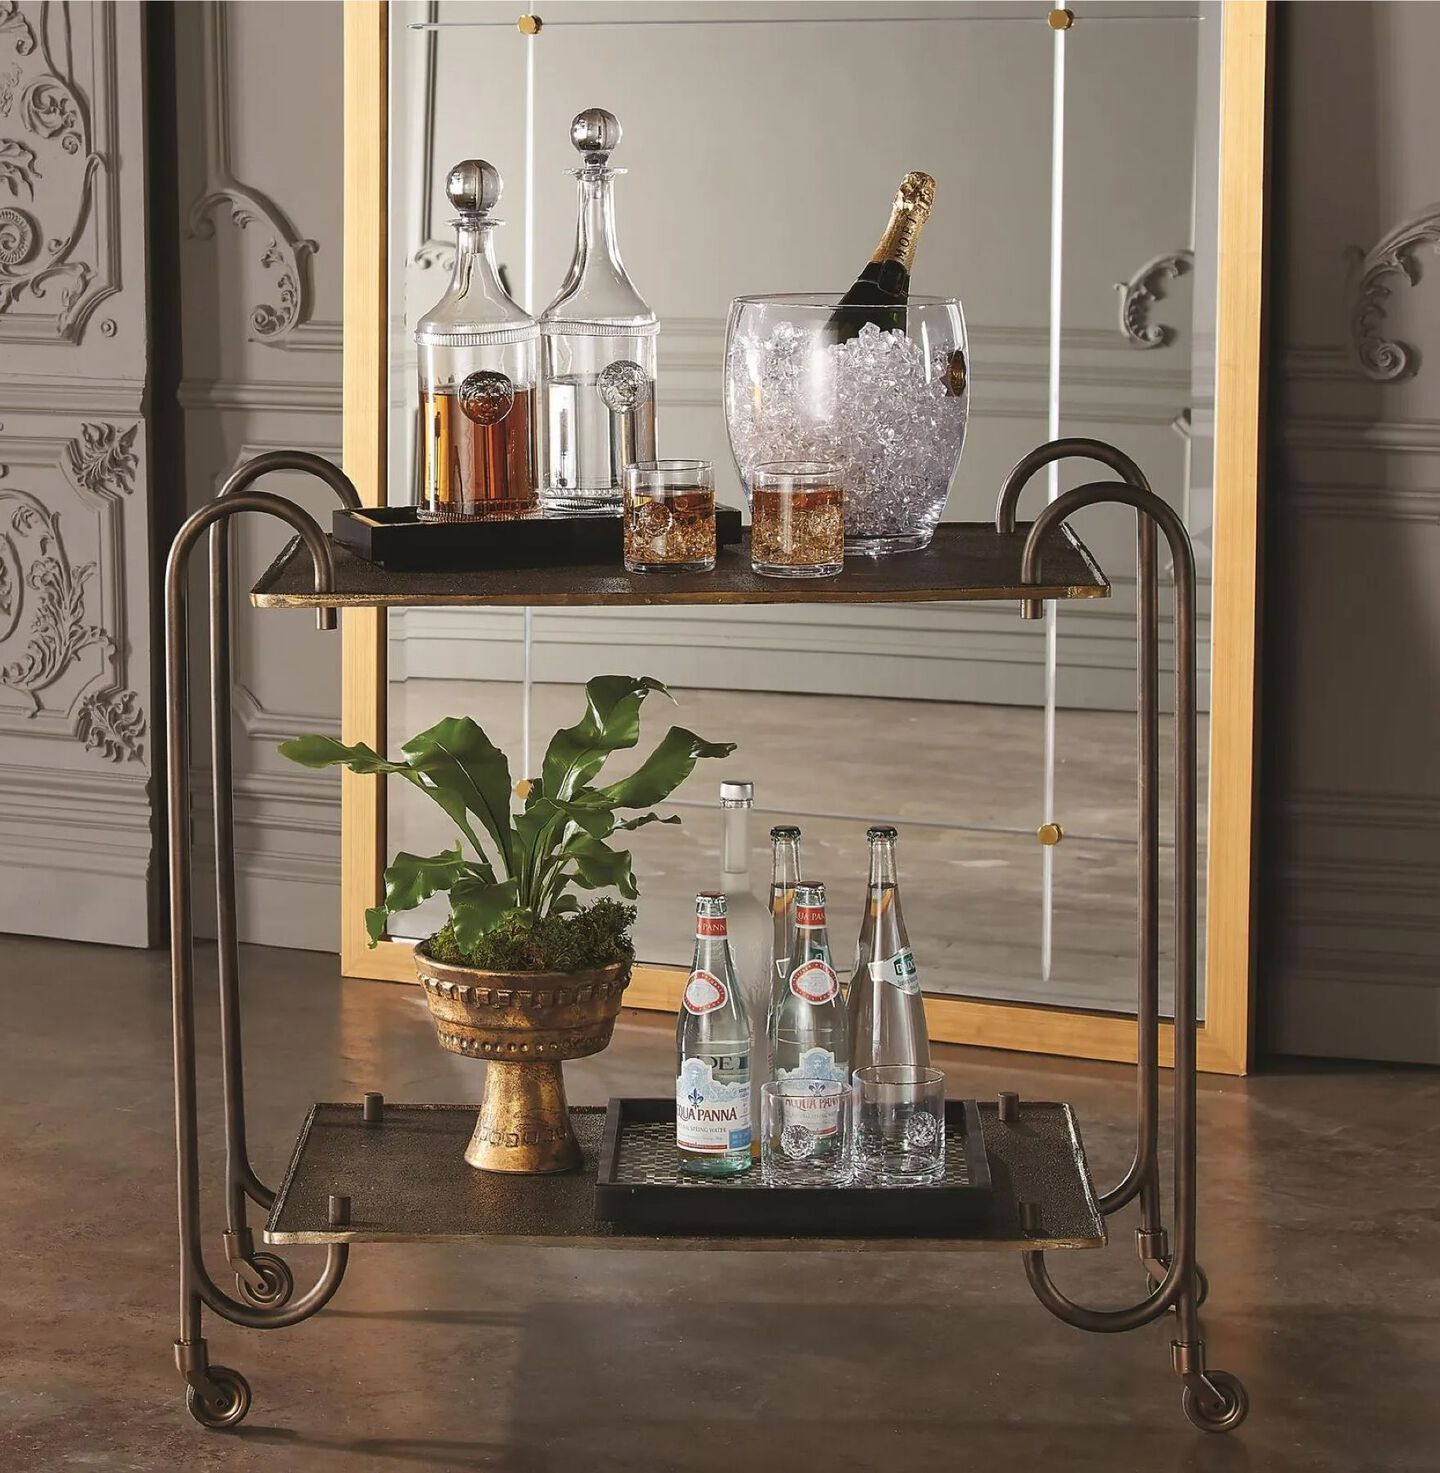 Bronze metal bar cart with arching legs sitting in a room in front of a mirror